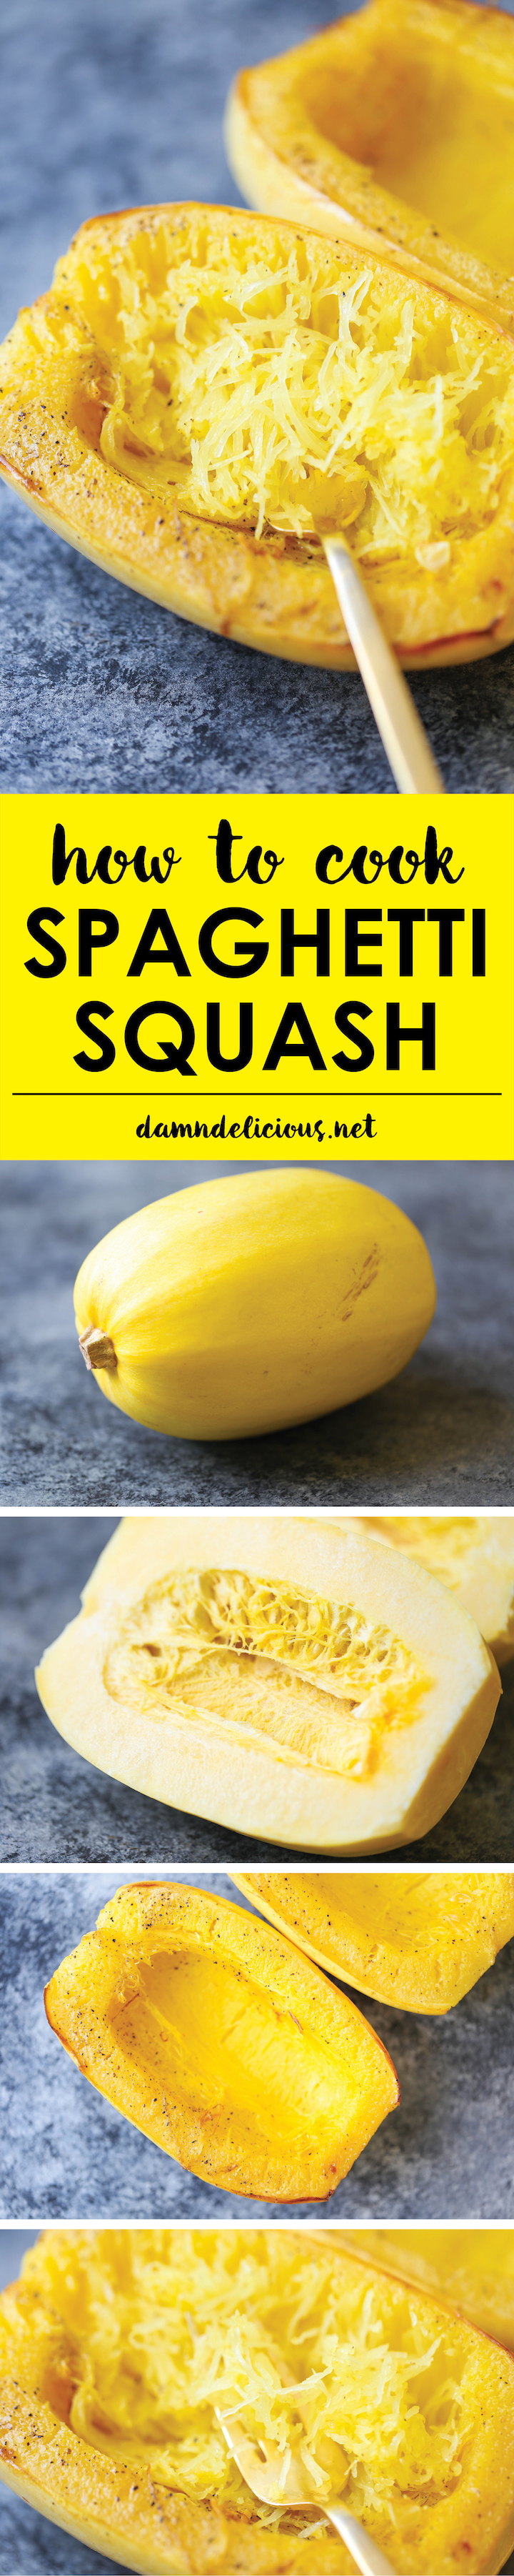 How to Cook Spaghetti Squash - The simplest and EASIEST way to cook spaghetti squash. And it's such a healthy substitute to pasta - low in calories and fat!